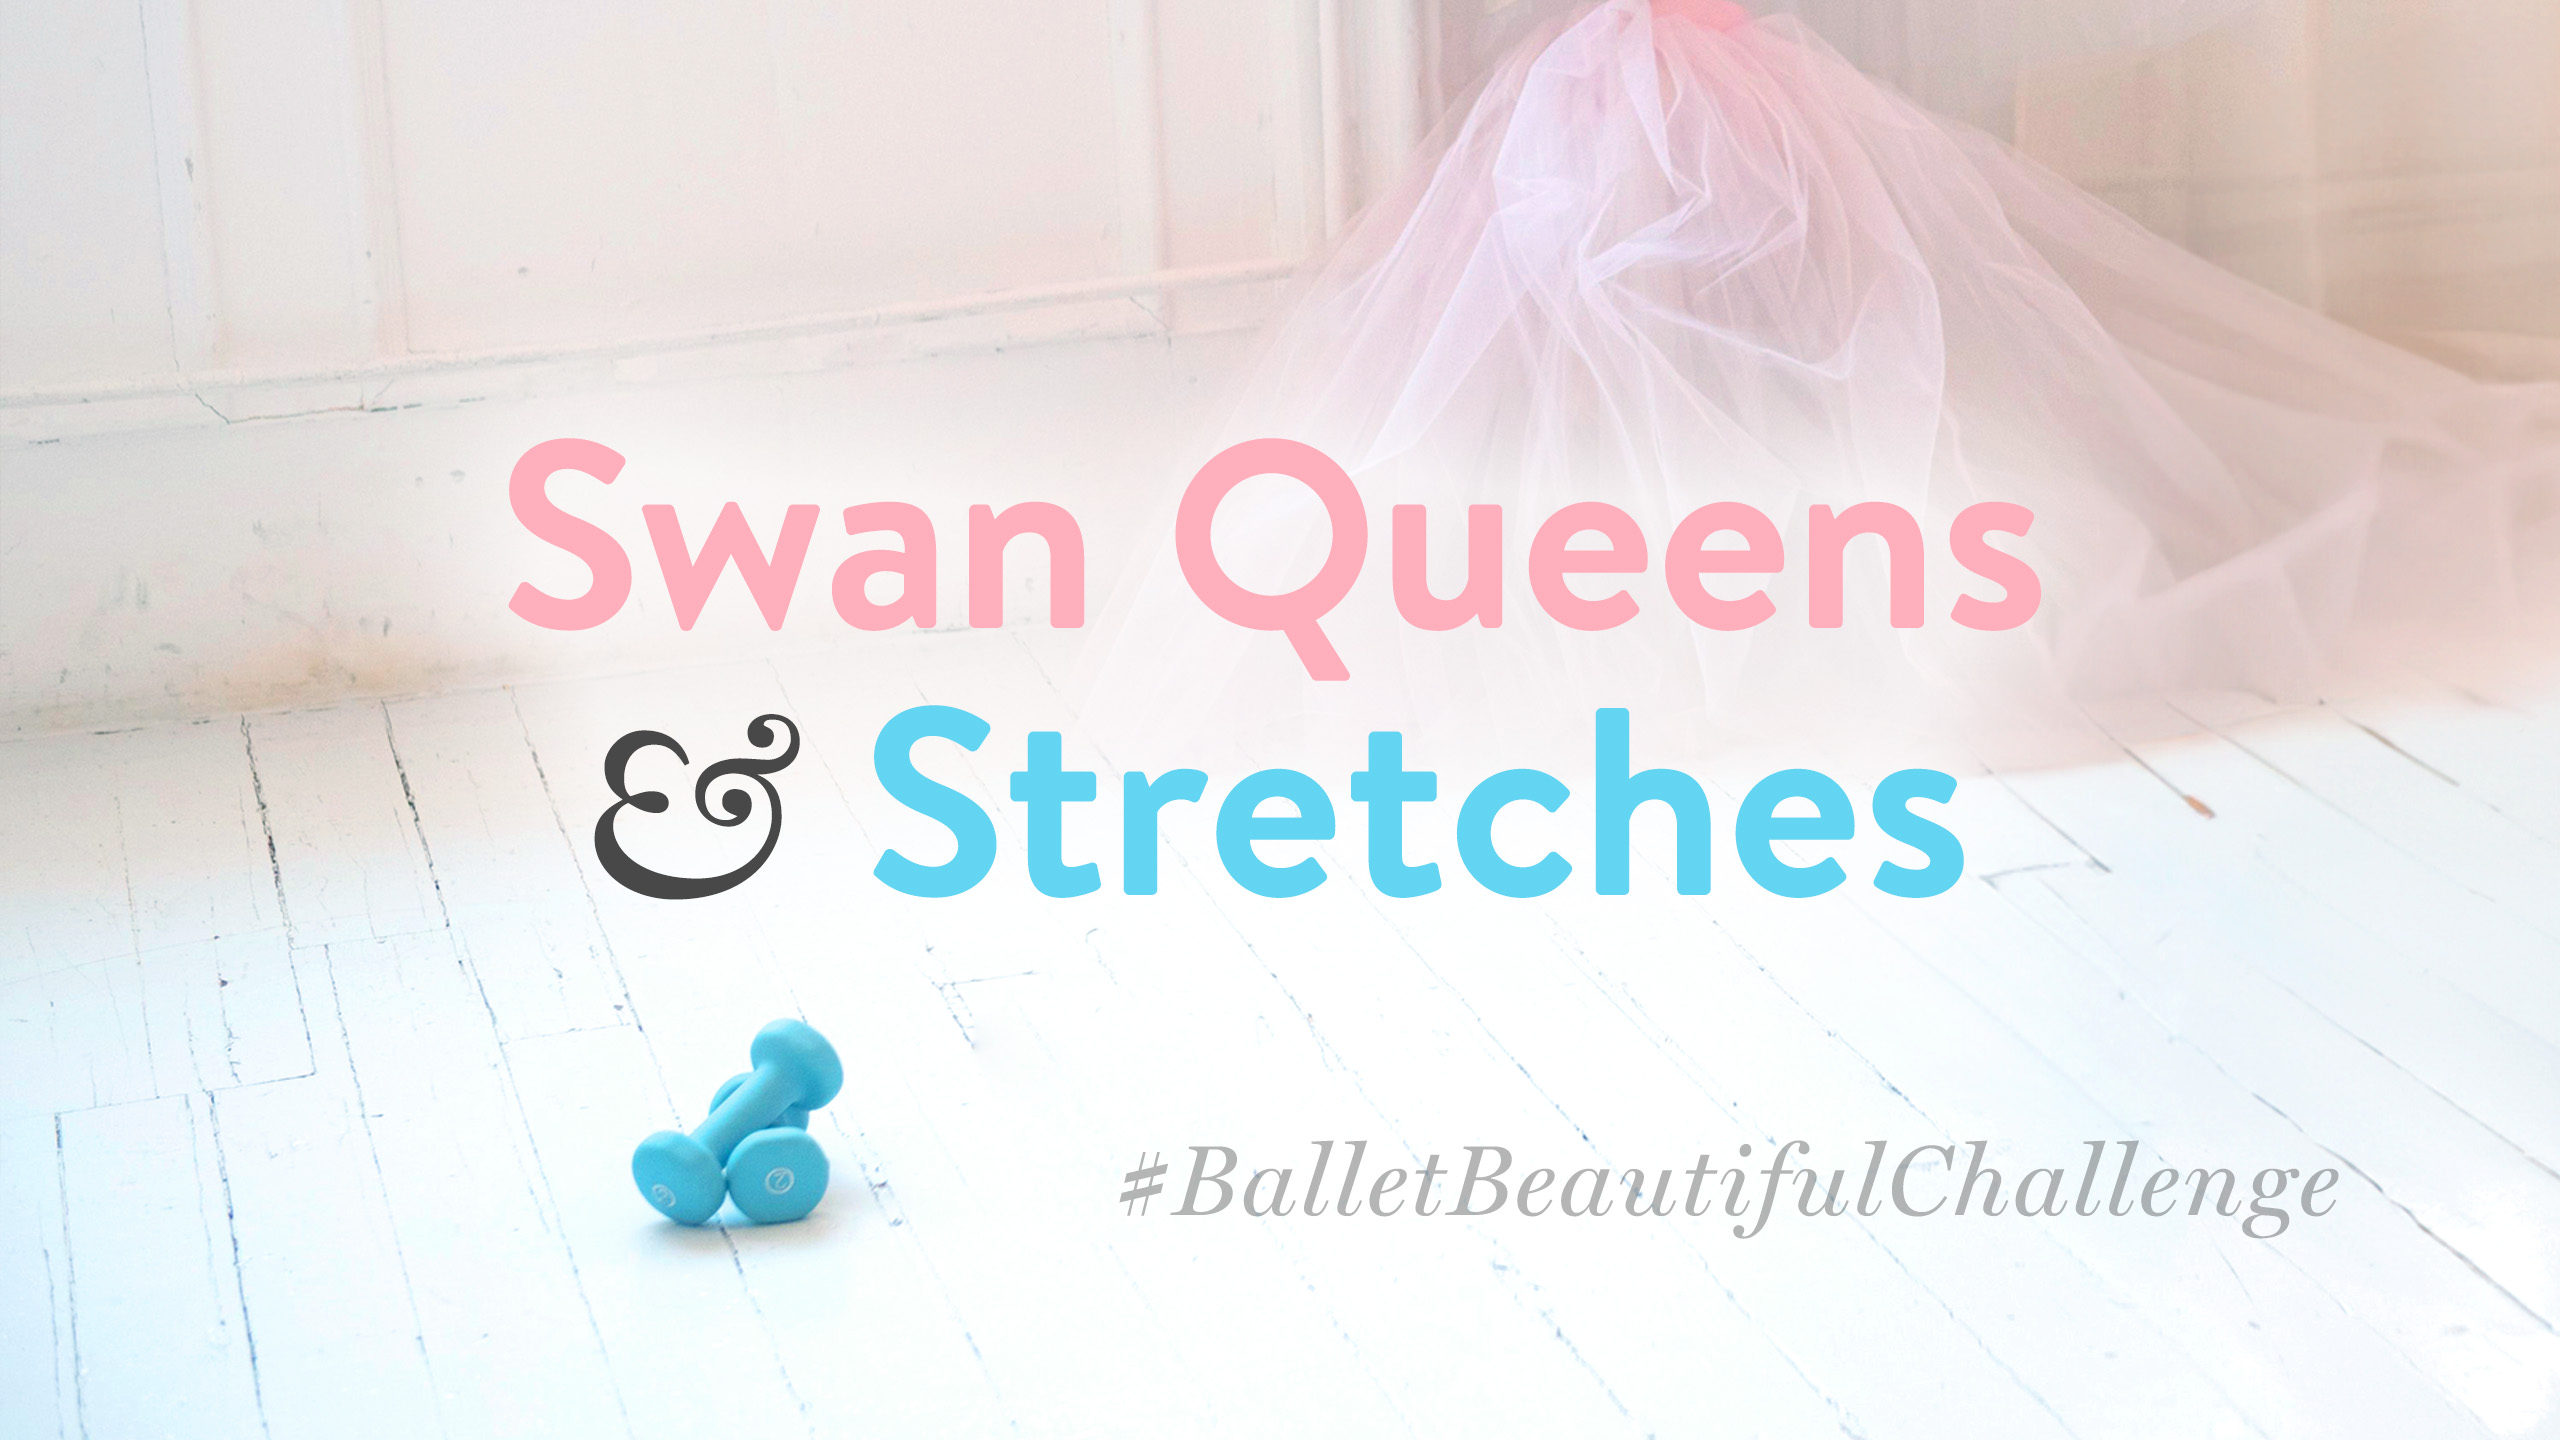 Swan Queens & Stretches